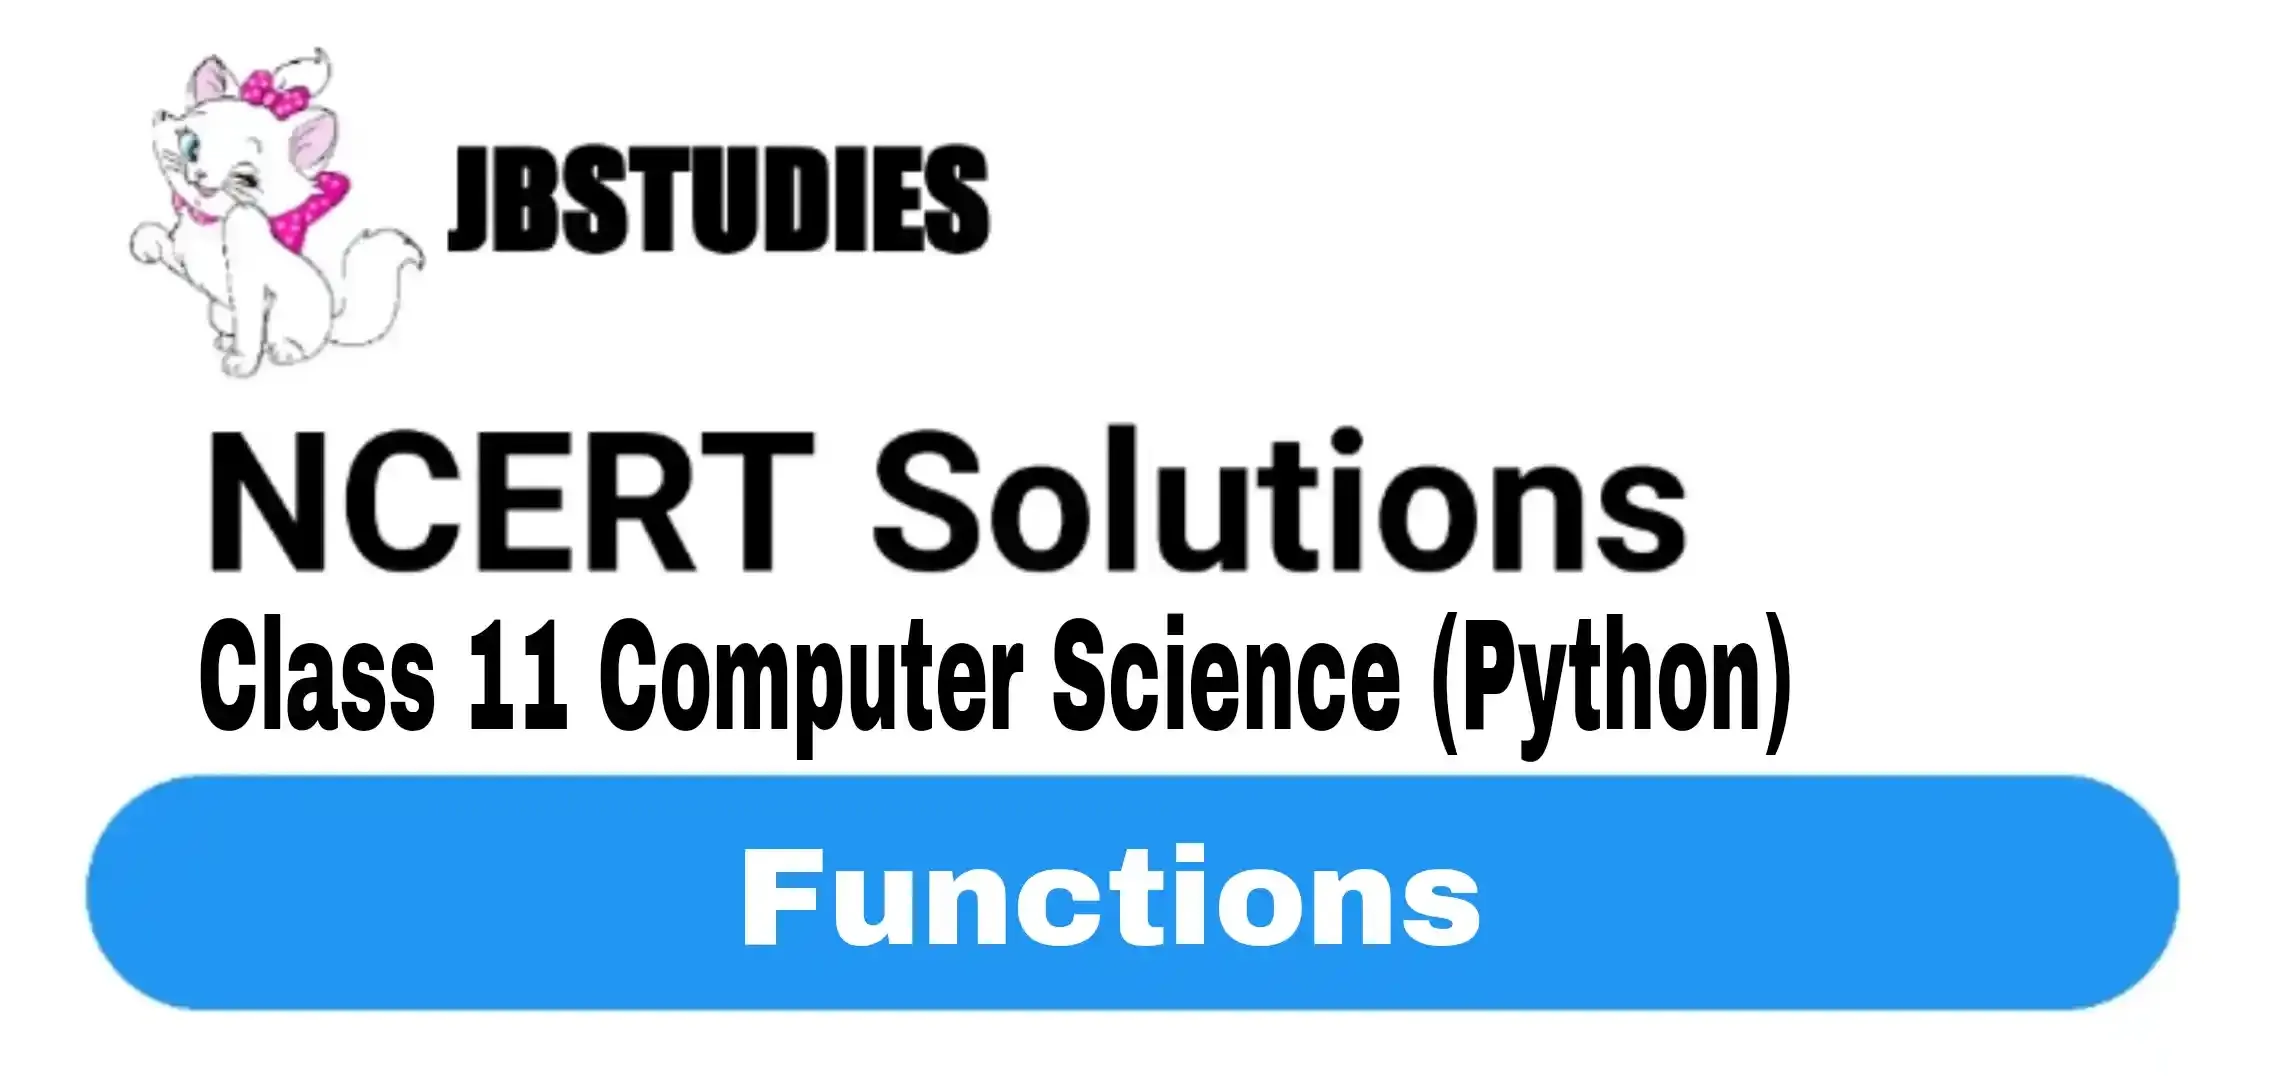 Solutions Class 11 Computer Science (Python) Chapter-10 (Functions)